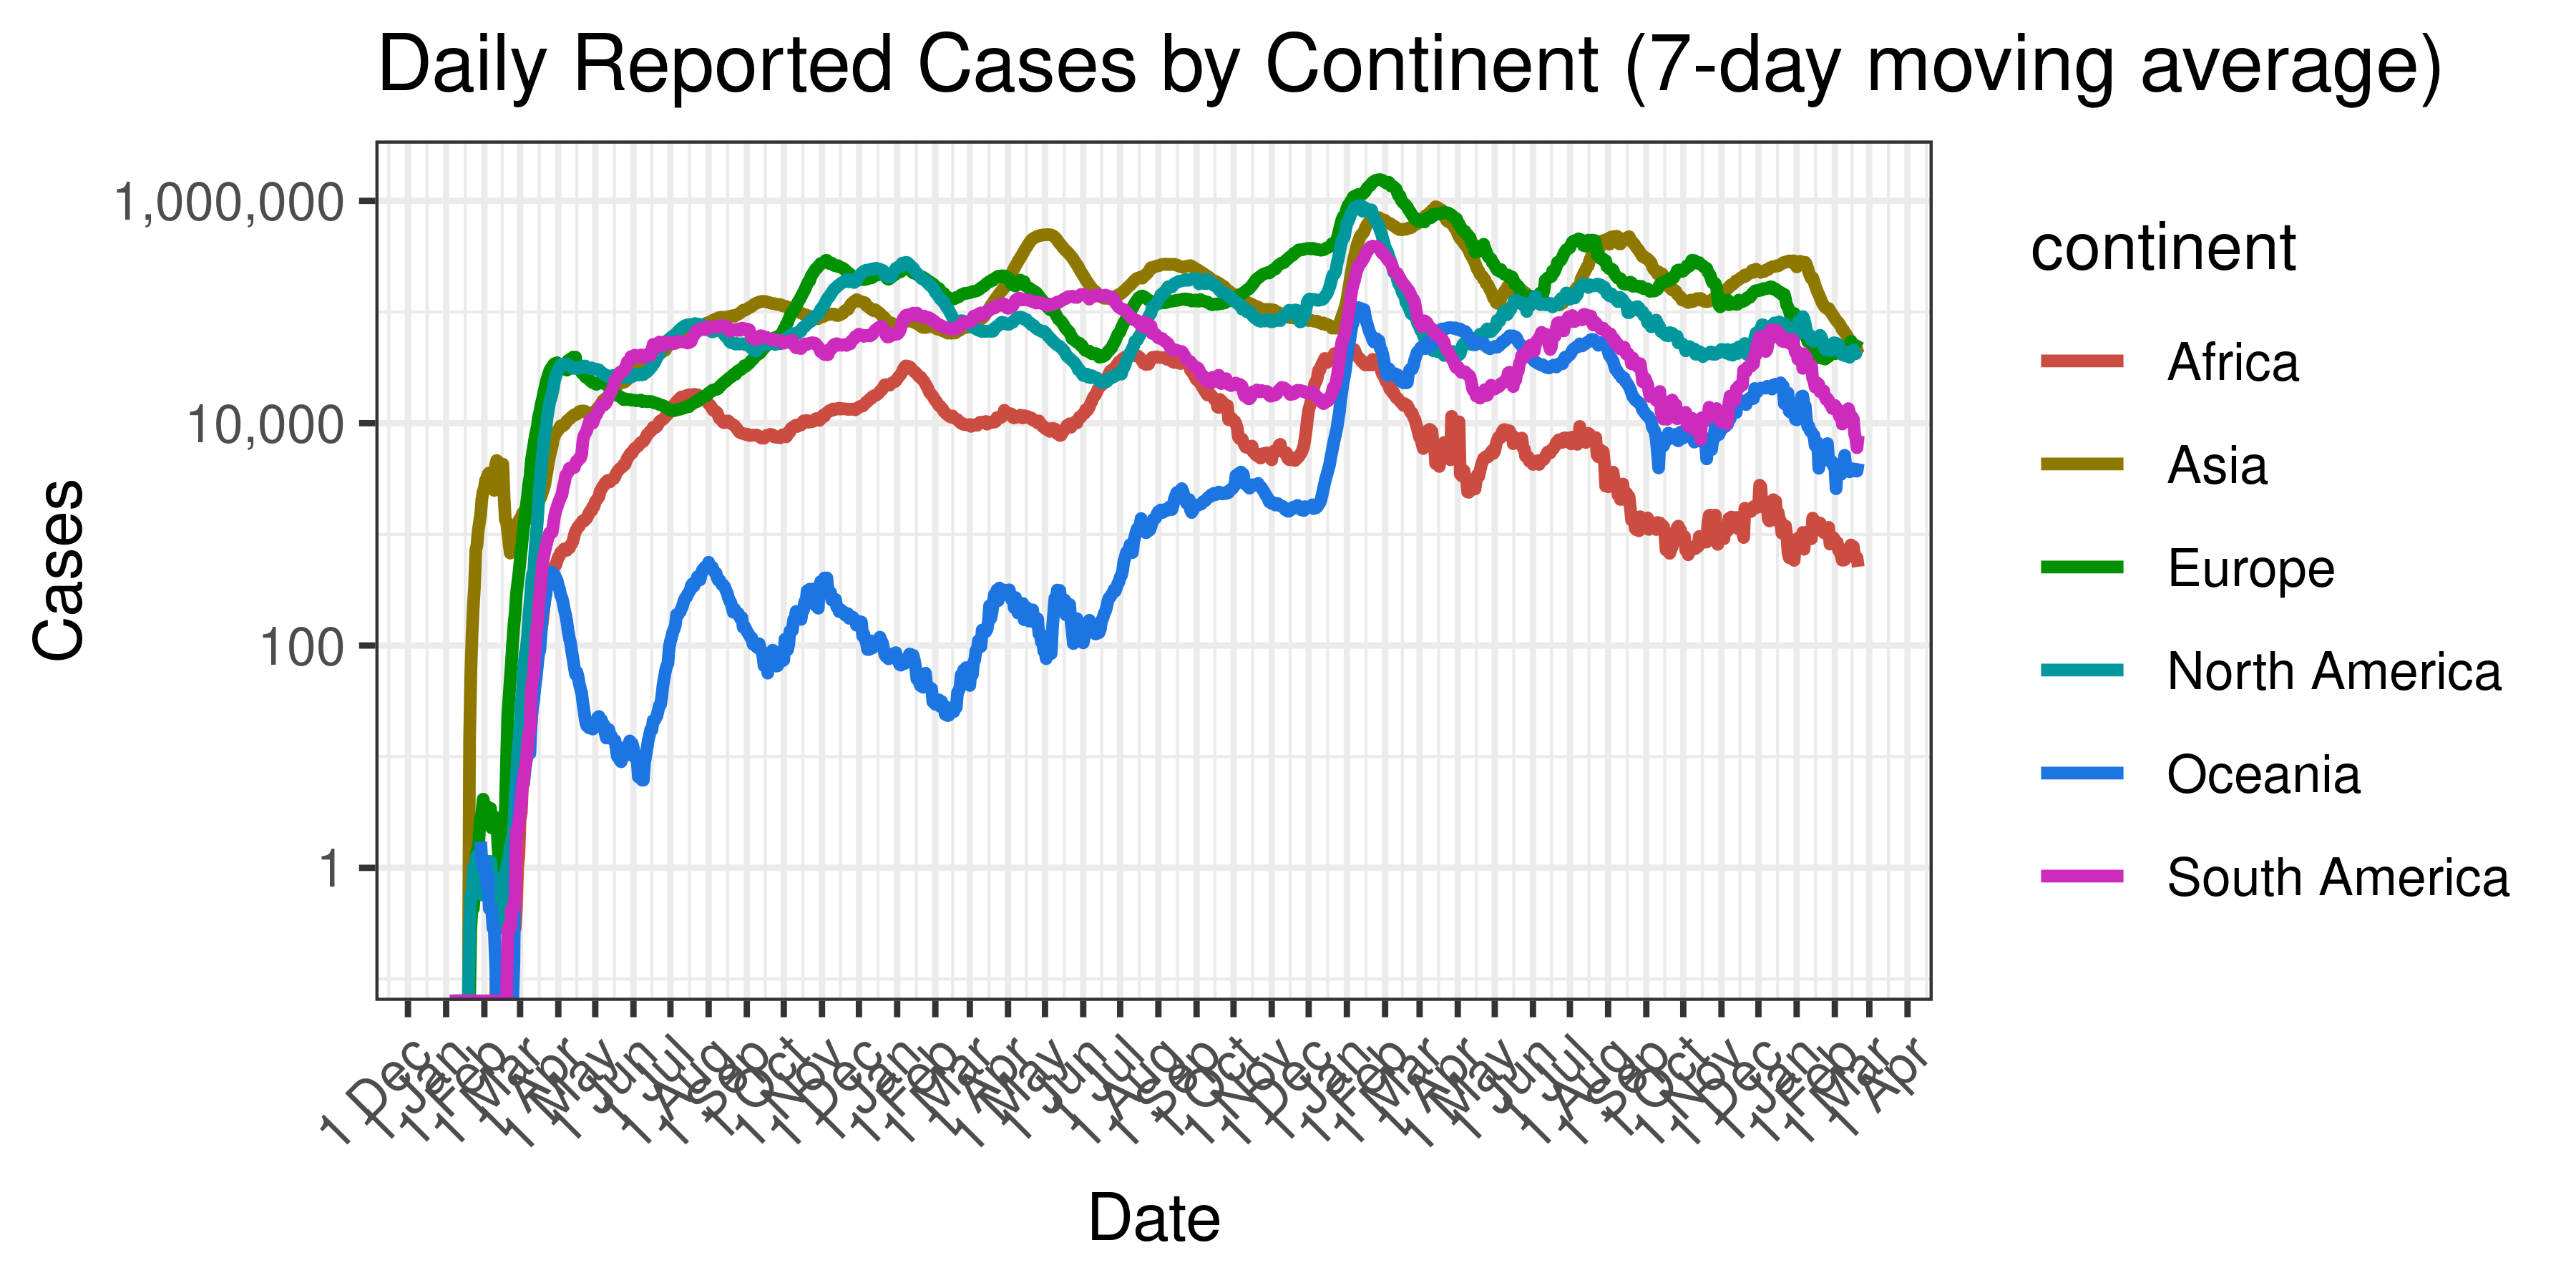 Daily Reported Cases by Continent (7-day moving average)